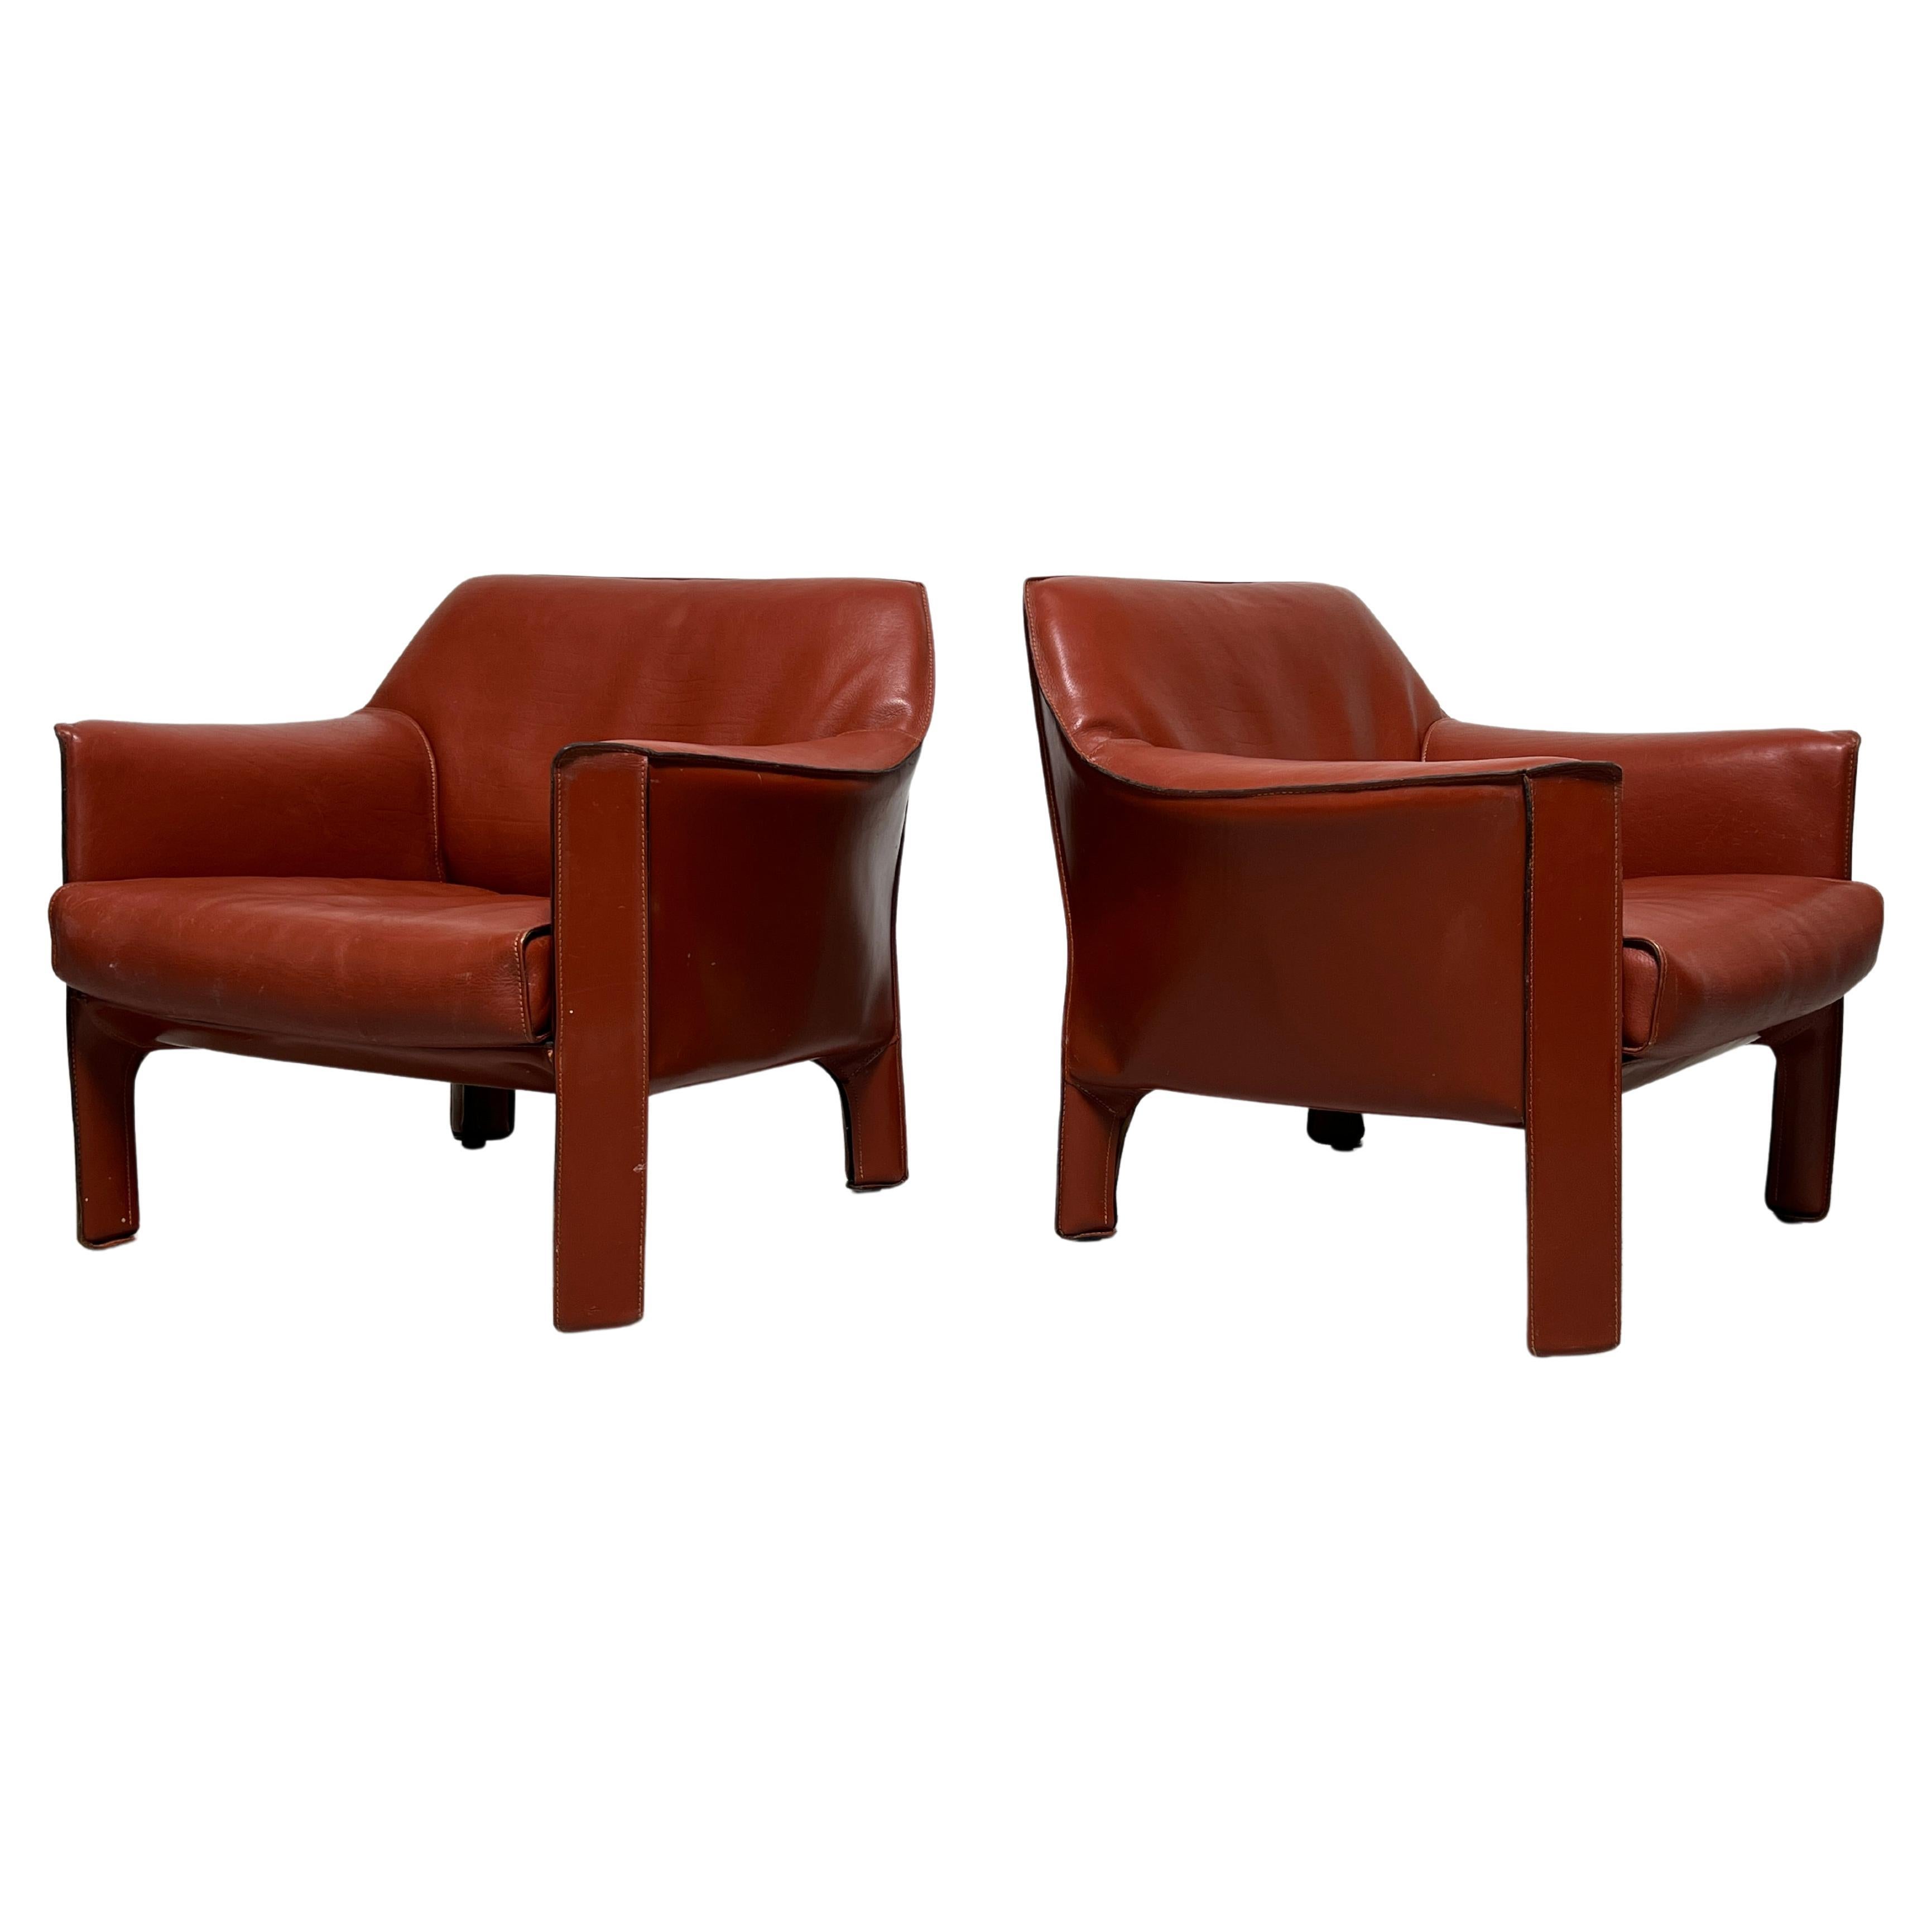 Pair of Large Cab Lounge Chairs by Mario Bellini